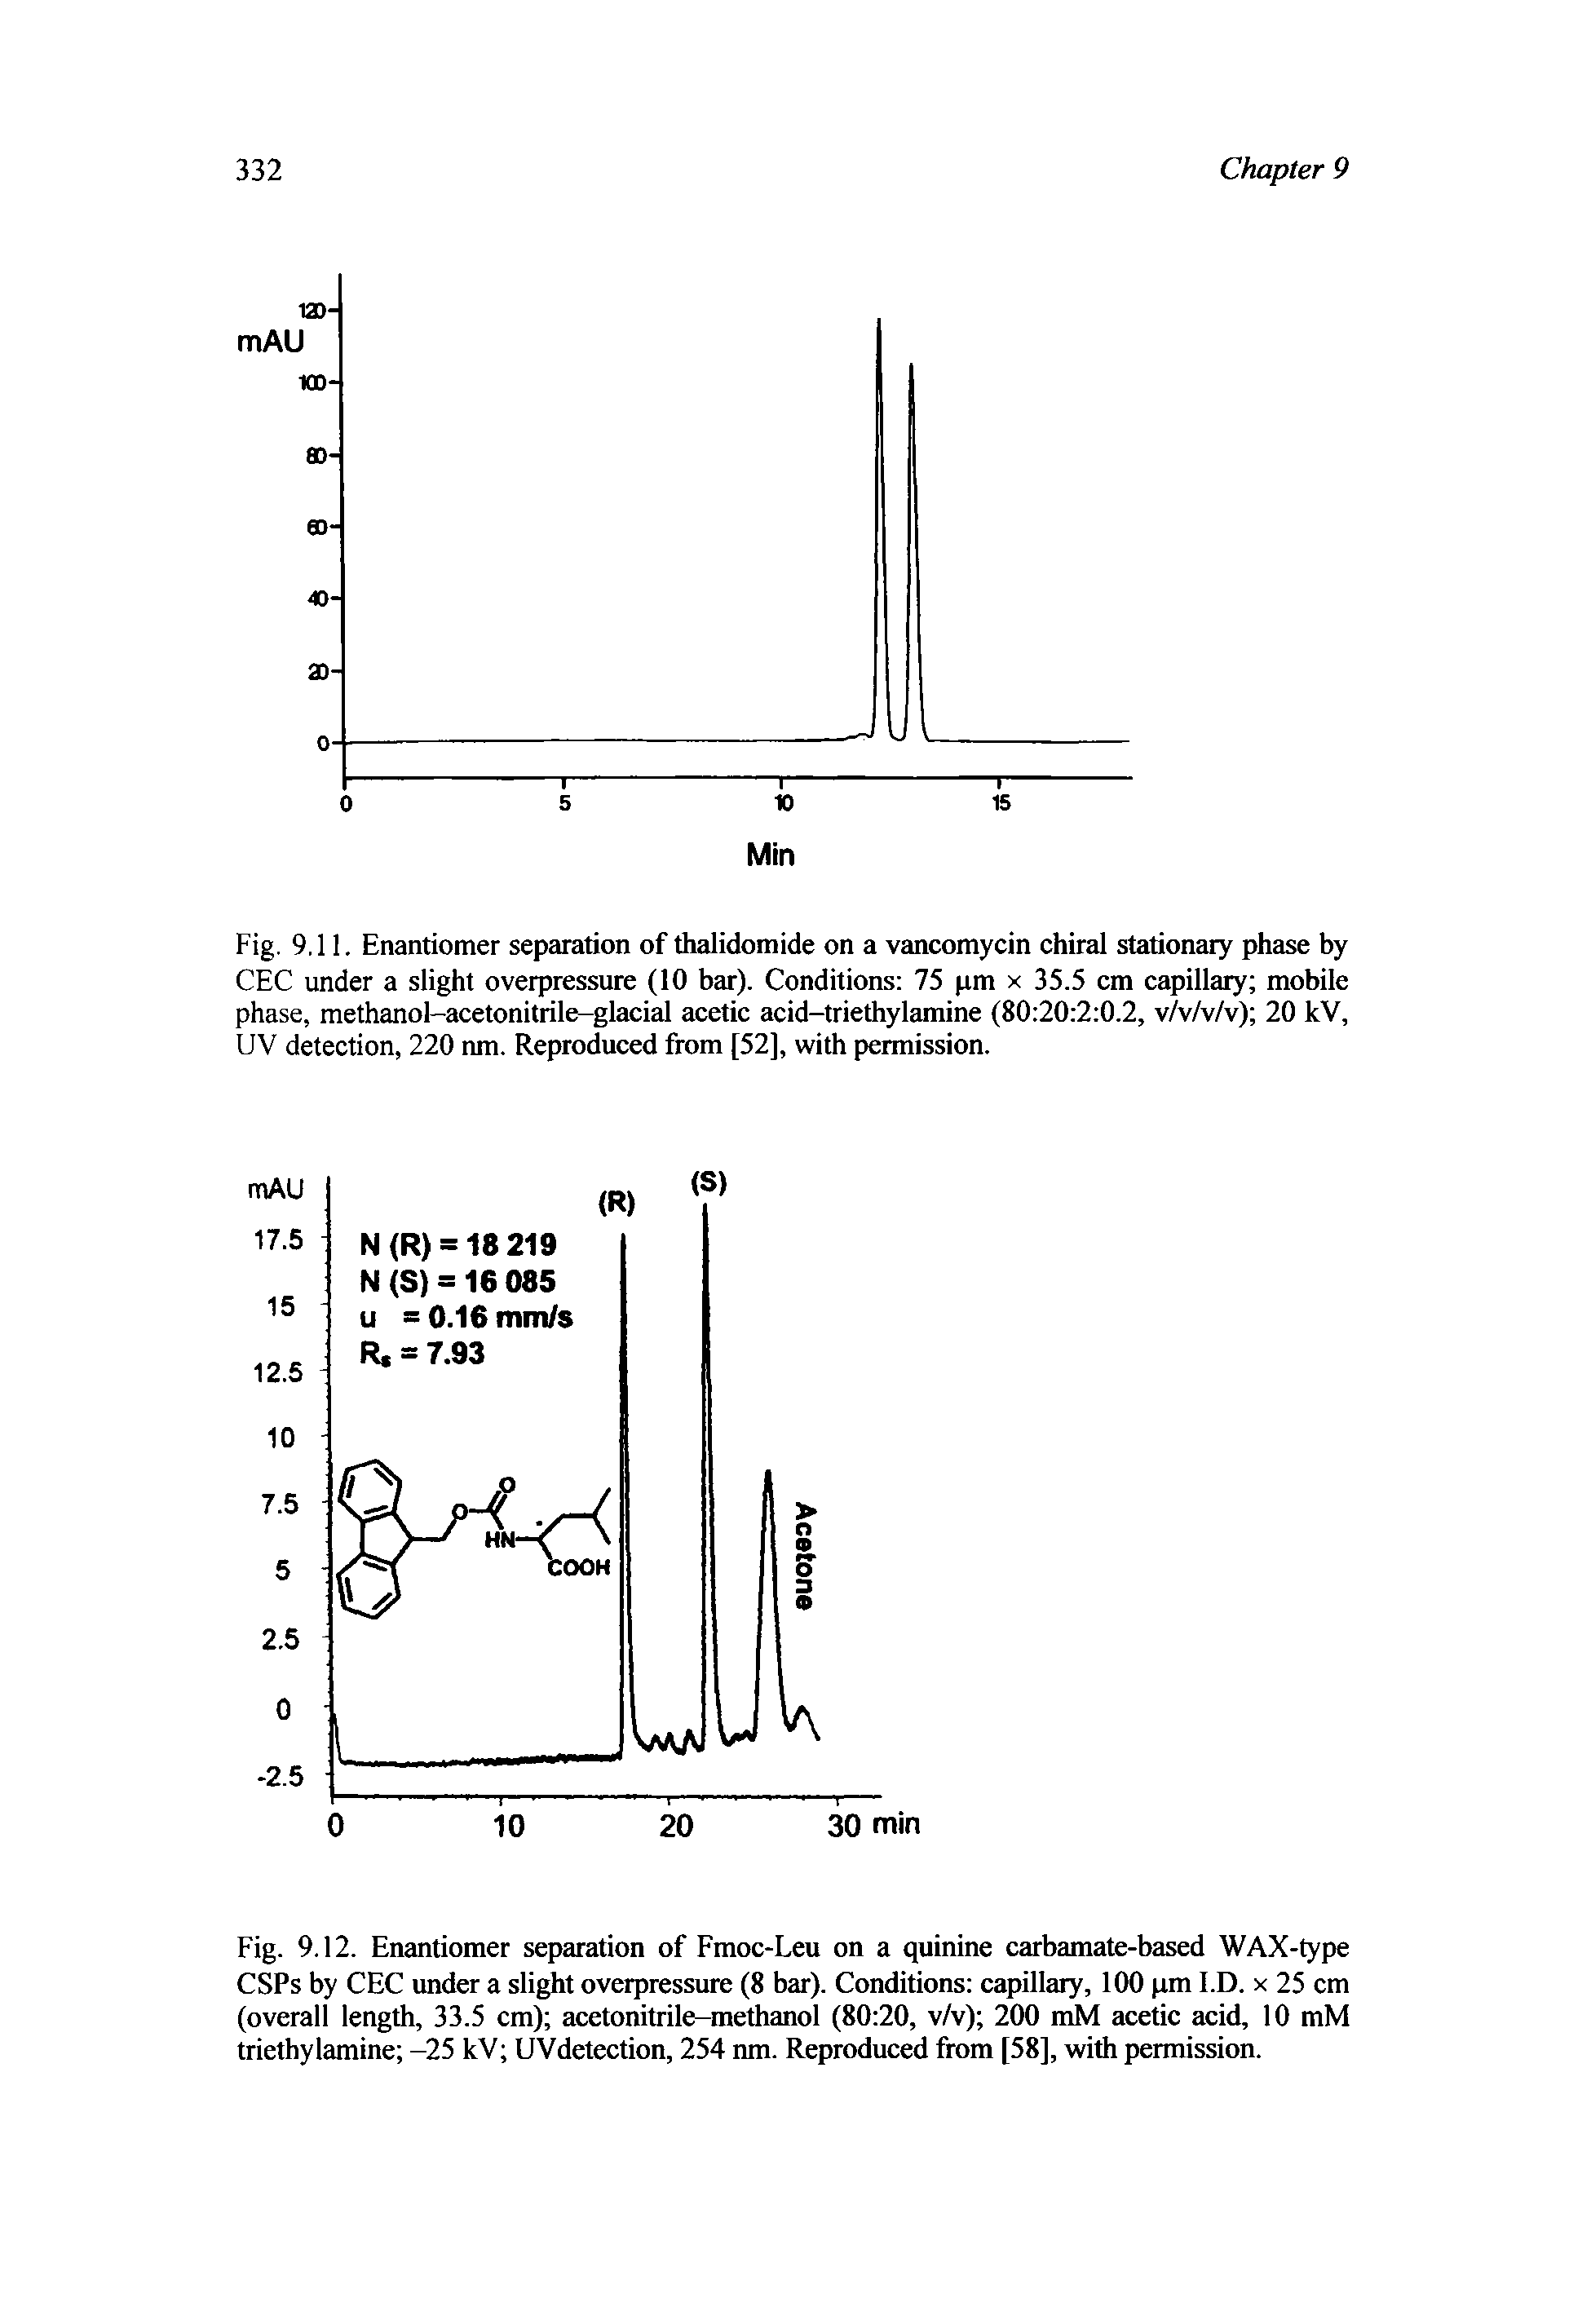 Fig. 9.12. Enantiomer separation of Fmoc-Leu on a quinine carbamate-based WAX-type CSPs by CEC under a slight overpressure (8 bar). Conditions capillary, 100 pm I.D. x 25 cm (overall length, 33.5 cm) acetonitrile-methanol (80 20, v/v) 200 mM acetic acid, 10 mM triethylamine -25 kV UVdetection, 254 nm. Reproduced from [58], with permission.